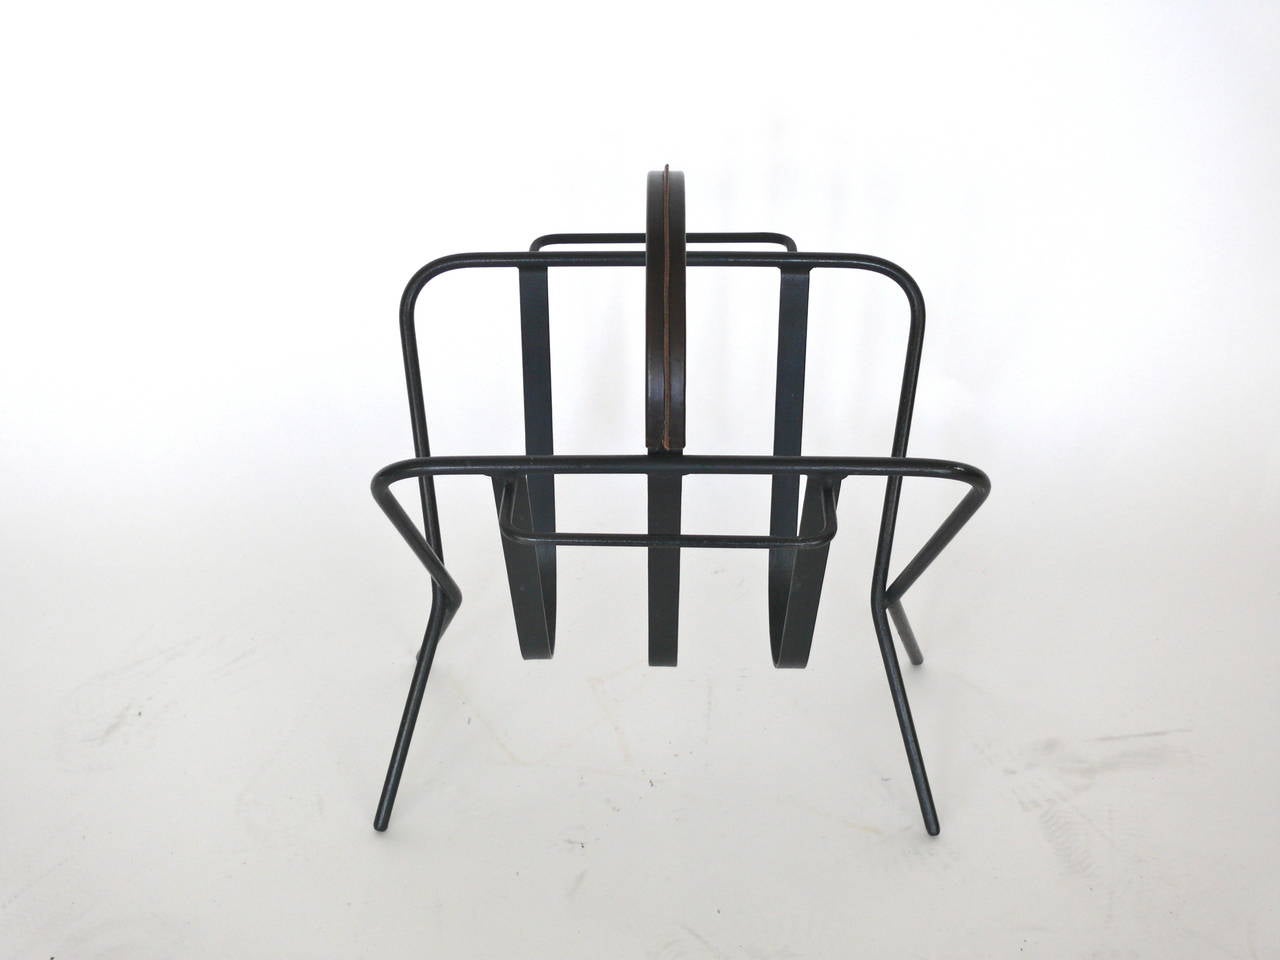 Large iron and leather magazine rack by Jacques Adnet. Heavy iron frame with brown leather wrapped handle. Great size. Excellent vintage condition.